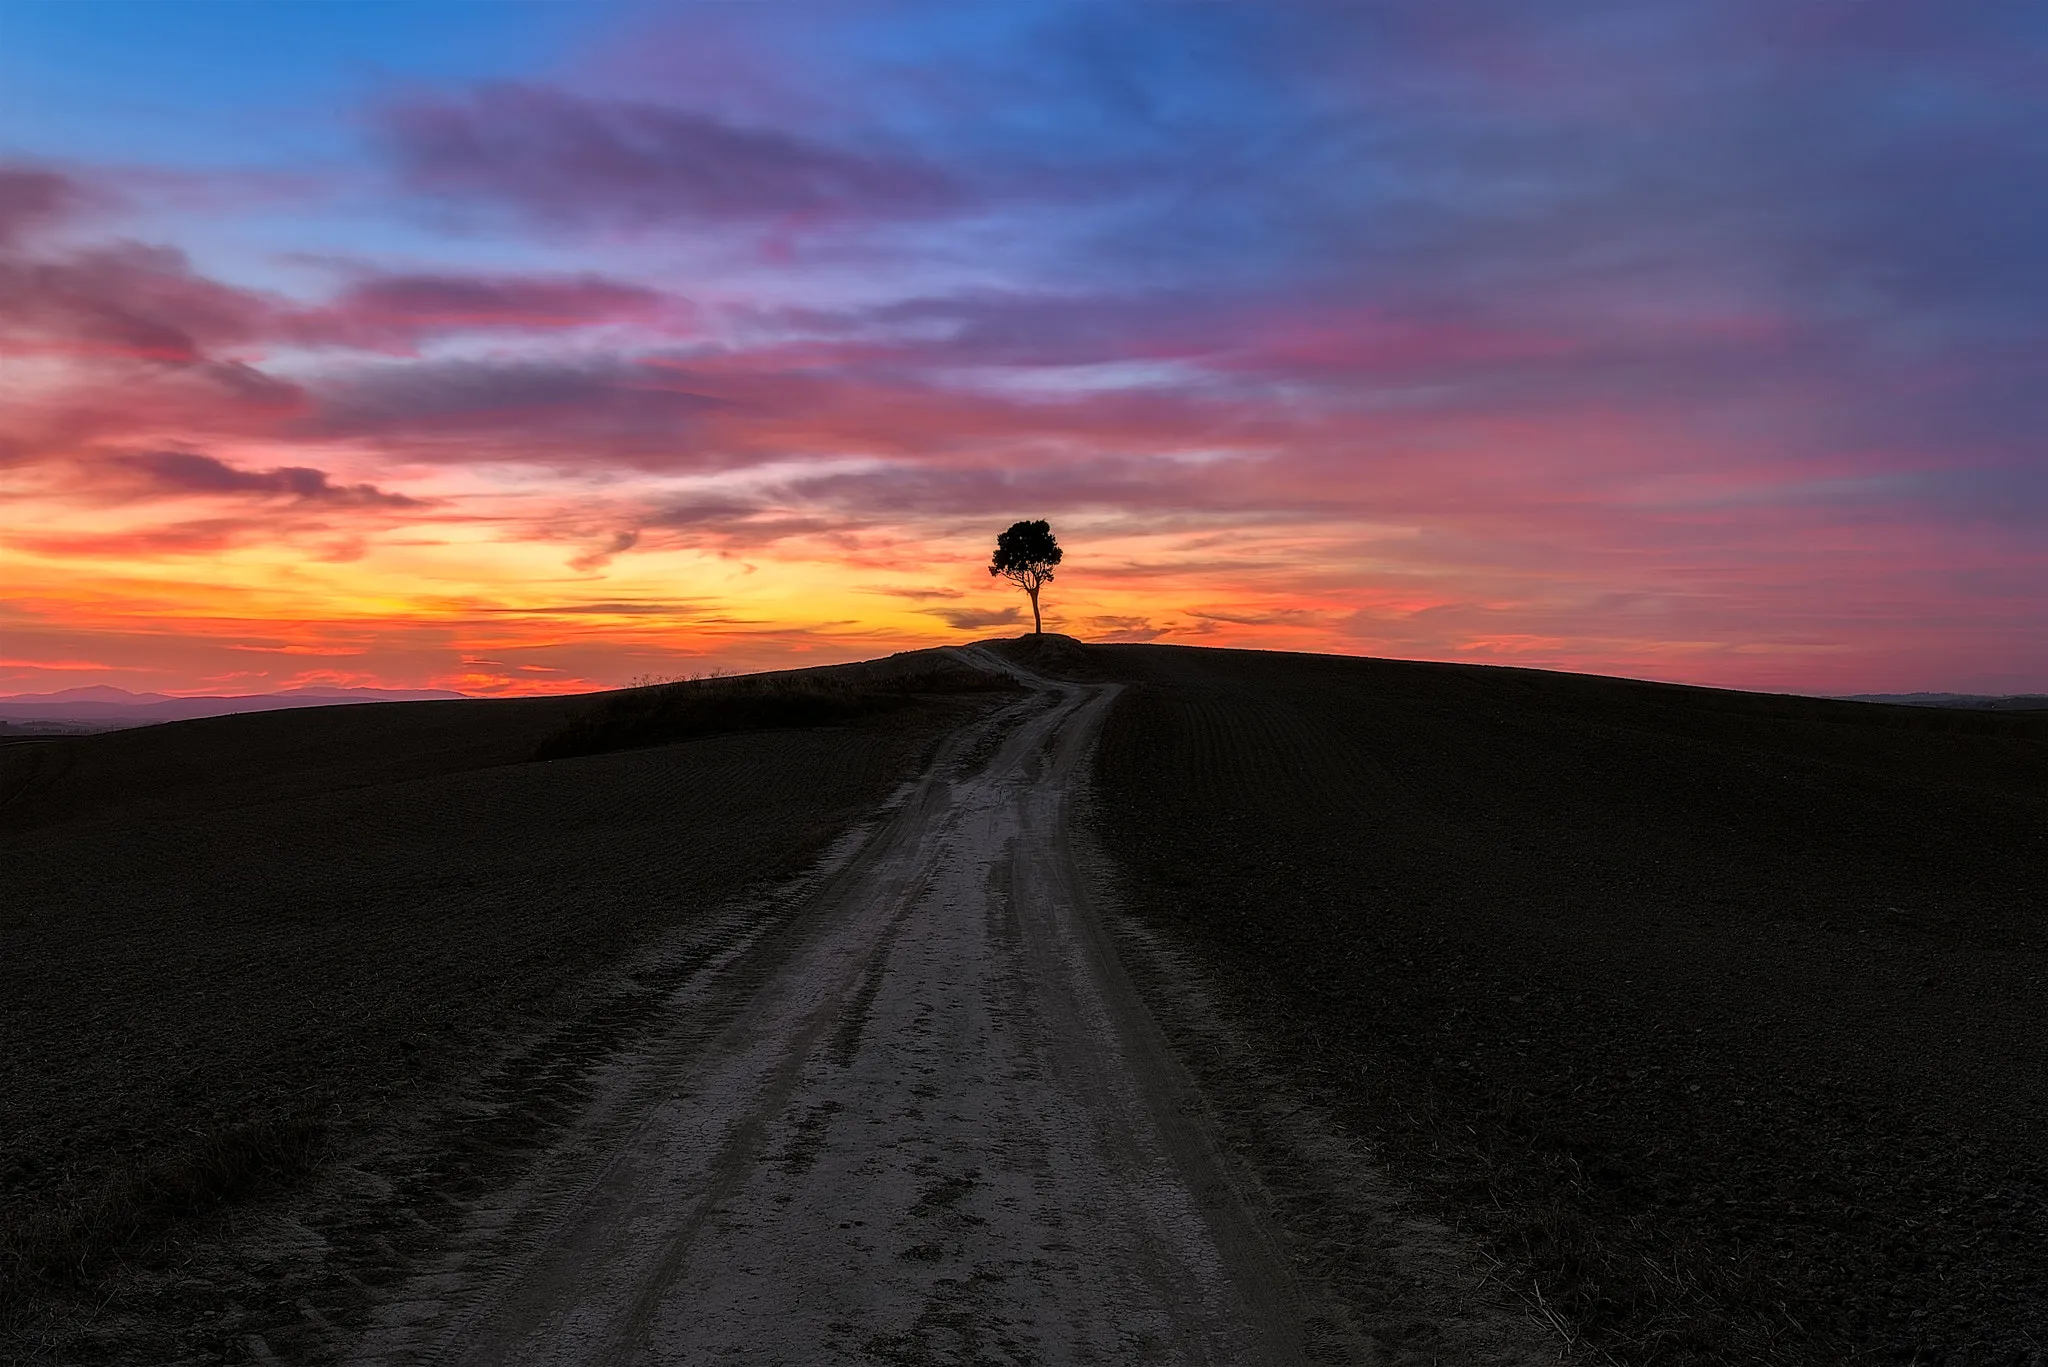 Photo showing: 500px provided description: Alone In The Light [#sky ,#landscape ,#red ,#sunset ,#color ,#blue ,#sunlight ,#clouds ,#italy ,#outdoor ,#tree ,#road ,#natural ,#silhouette ,#alone ,#warm ,#purple ,#countryside ,#sundown ,#long exposure ,#hills ,#rural ,#tuscany ,#nobody ,#burning sky ,#crete senesi]